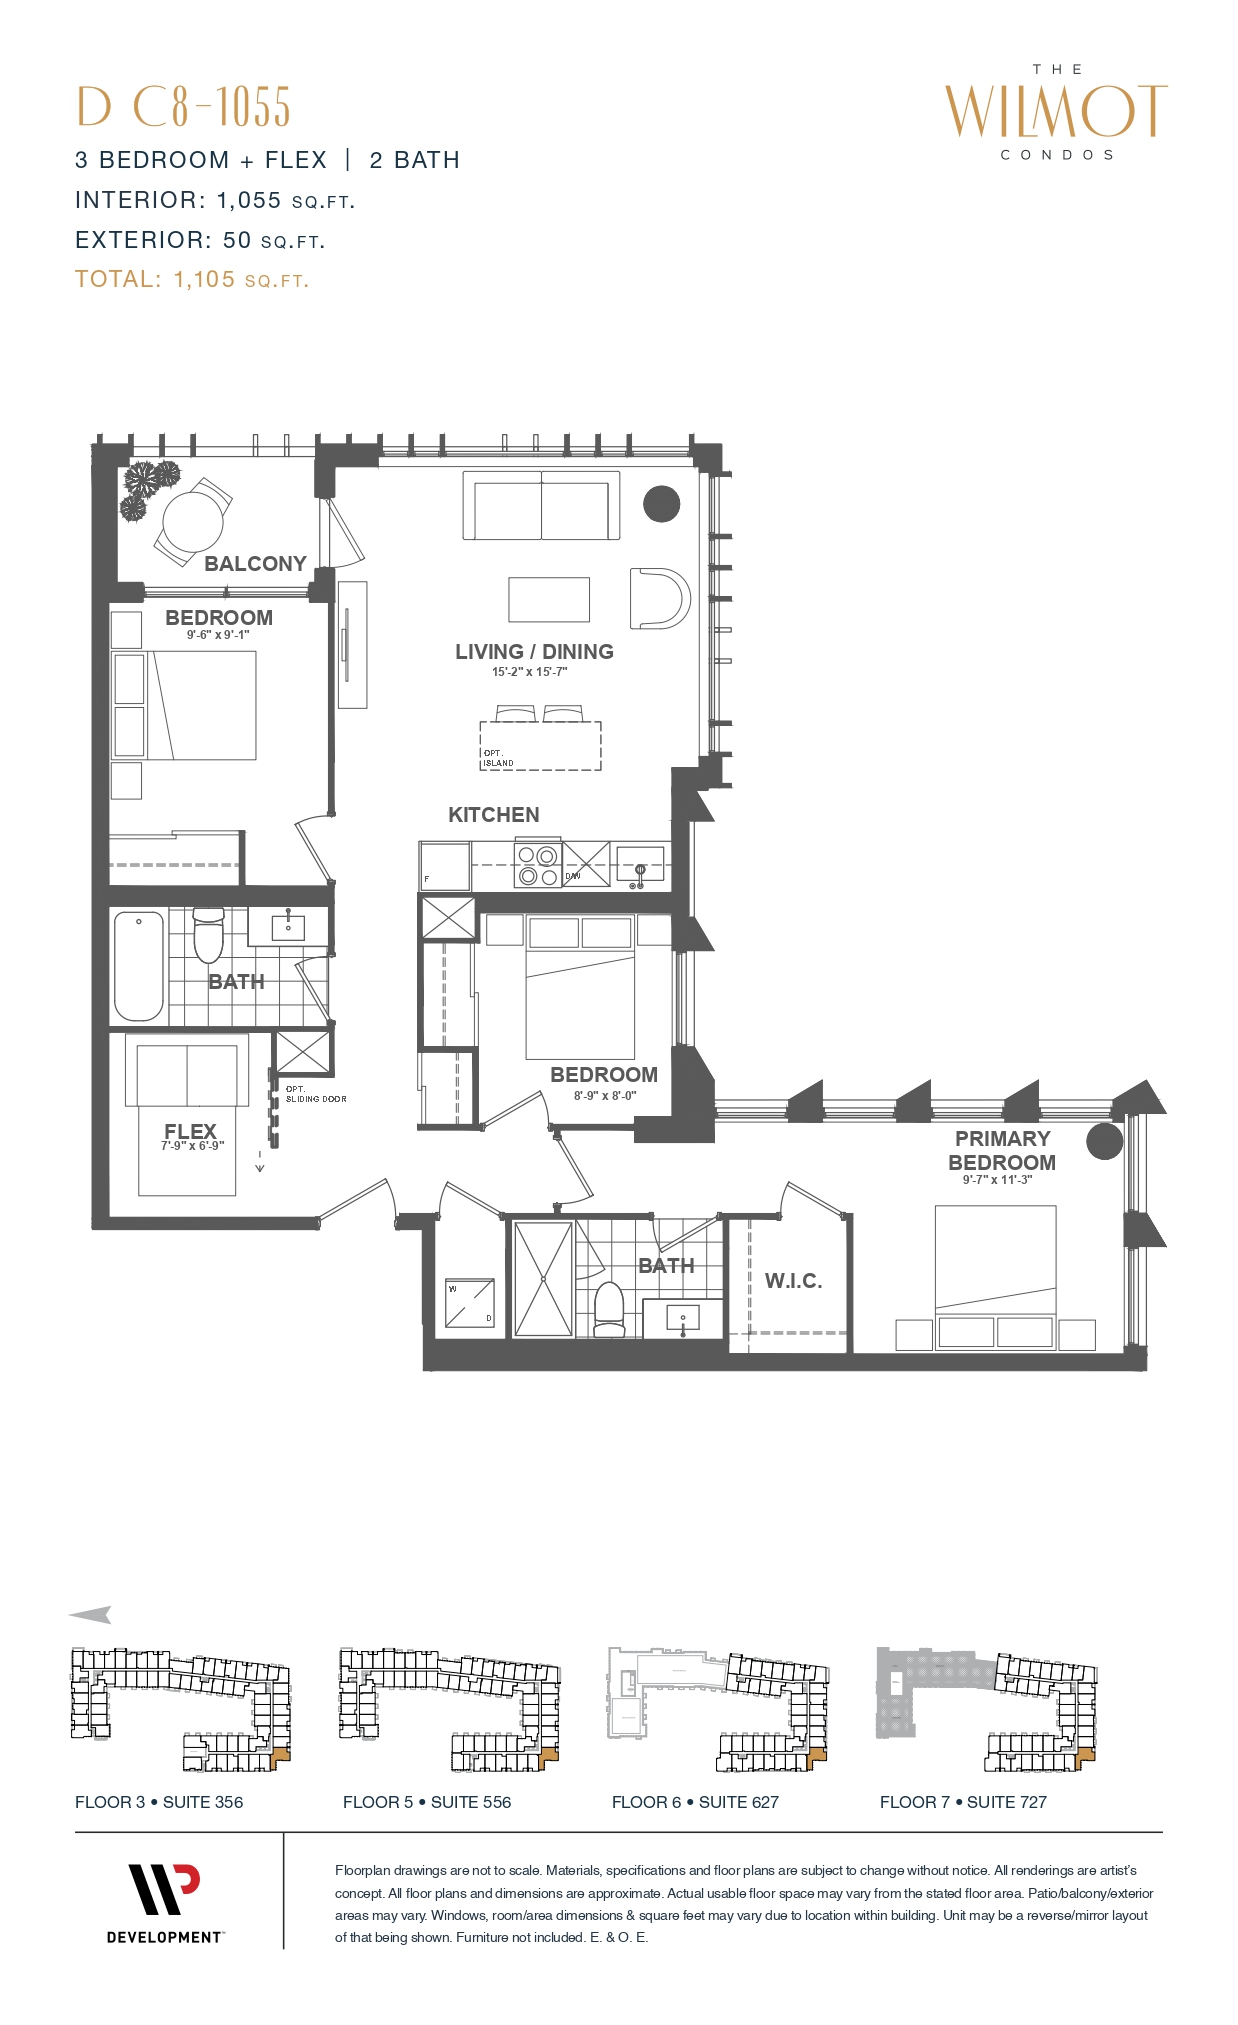  Floor Plan of The Wilmot Condos with undefined beds